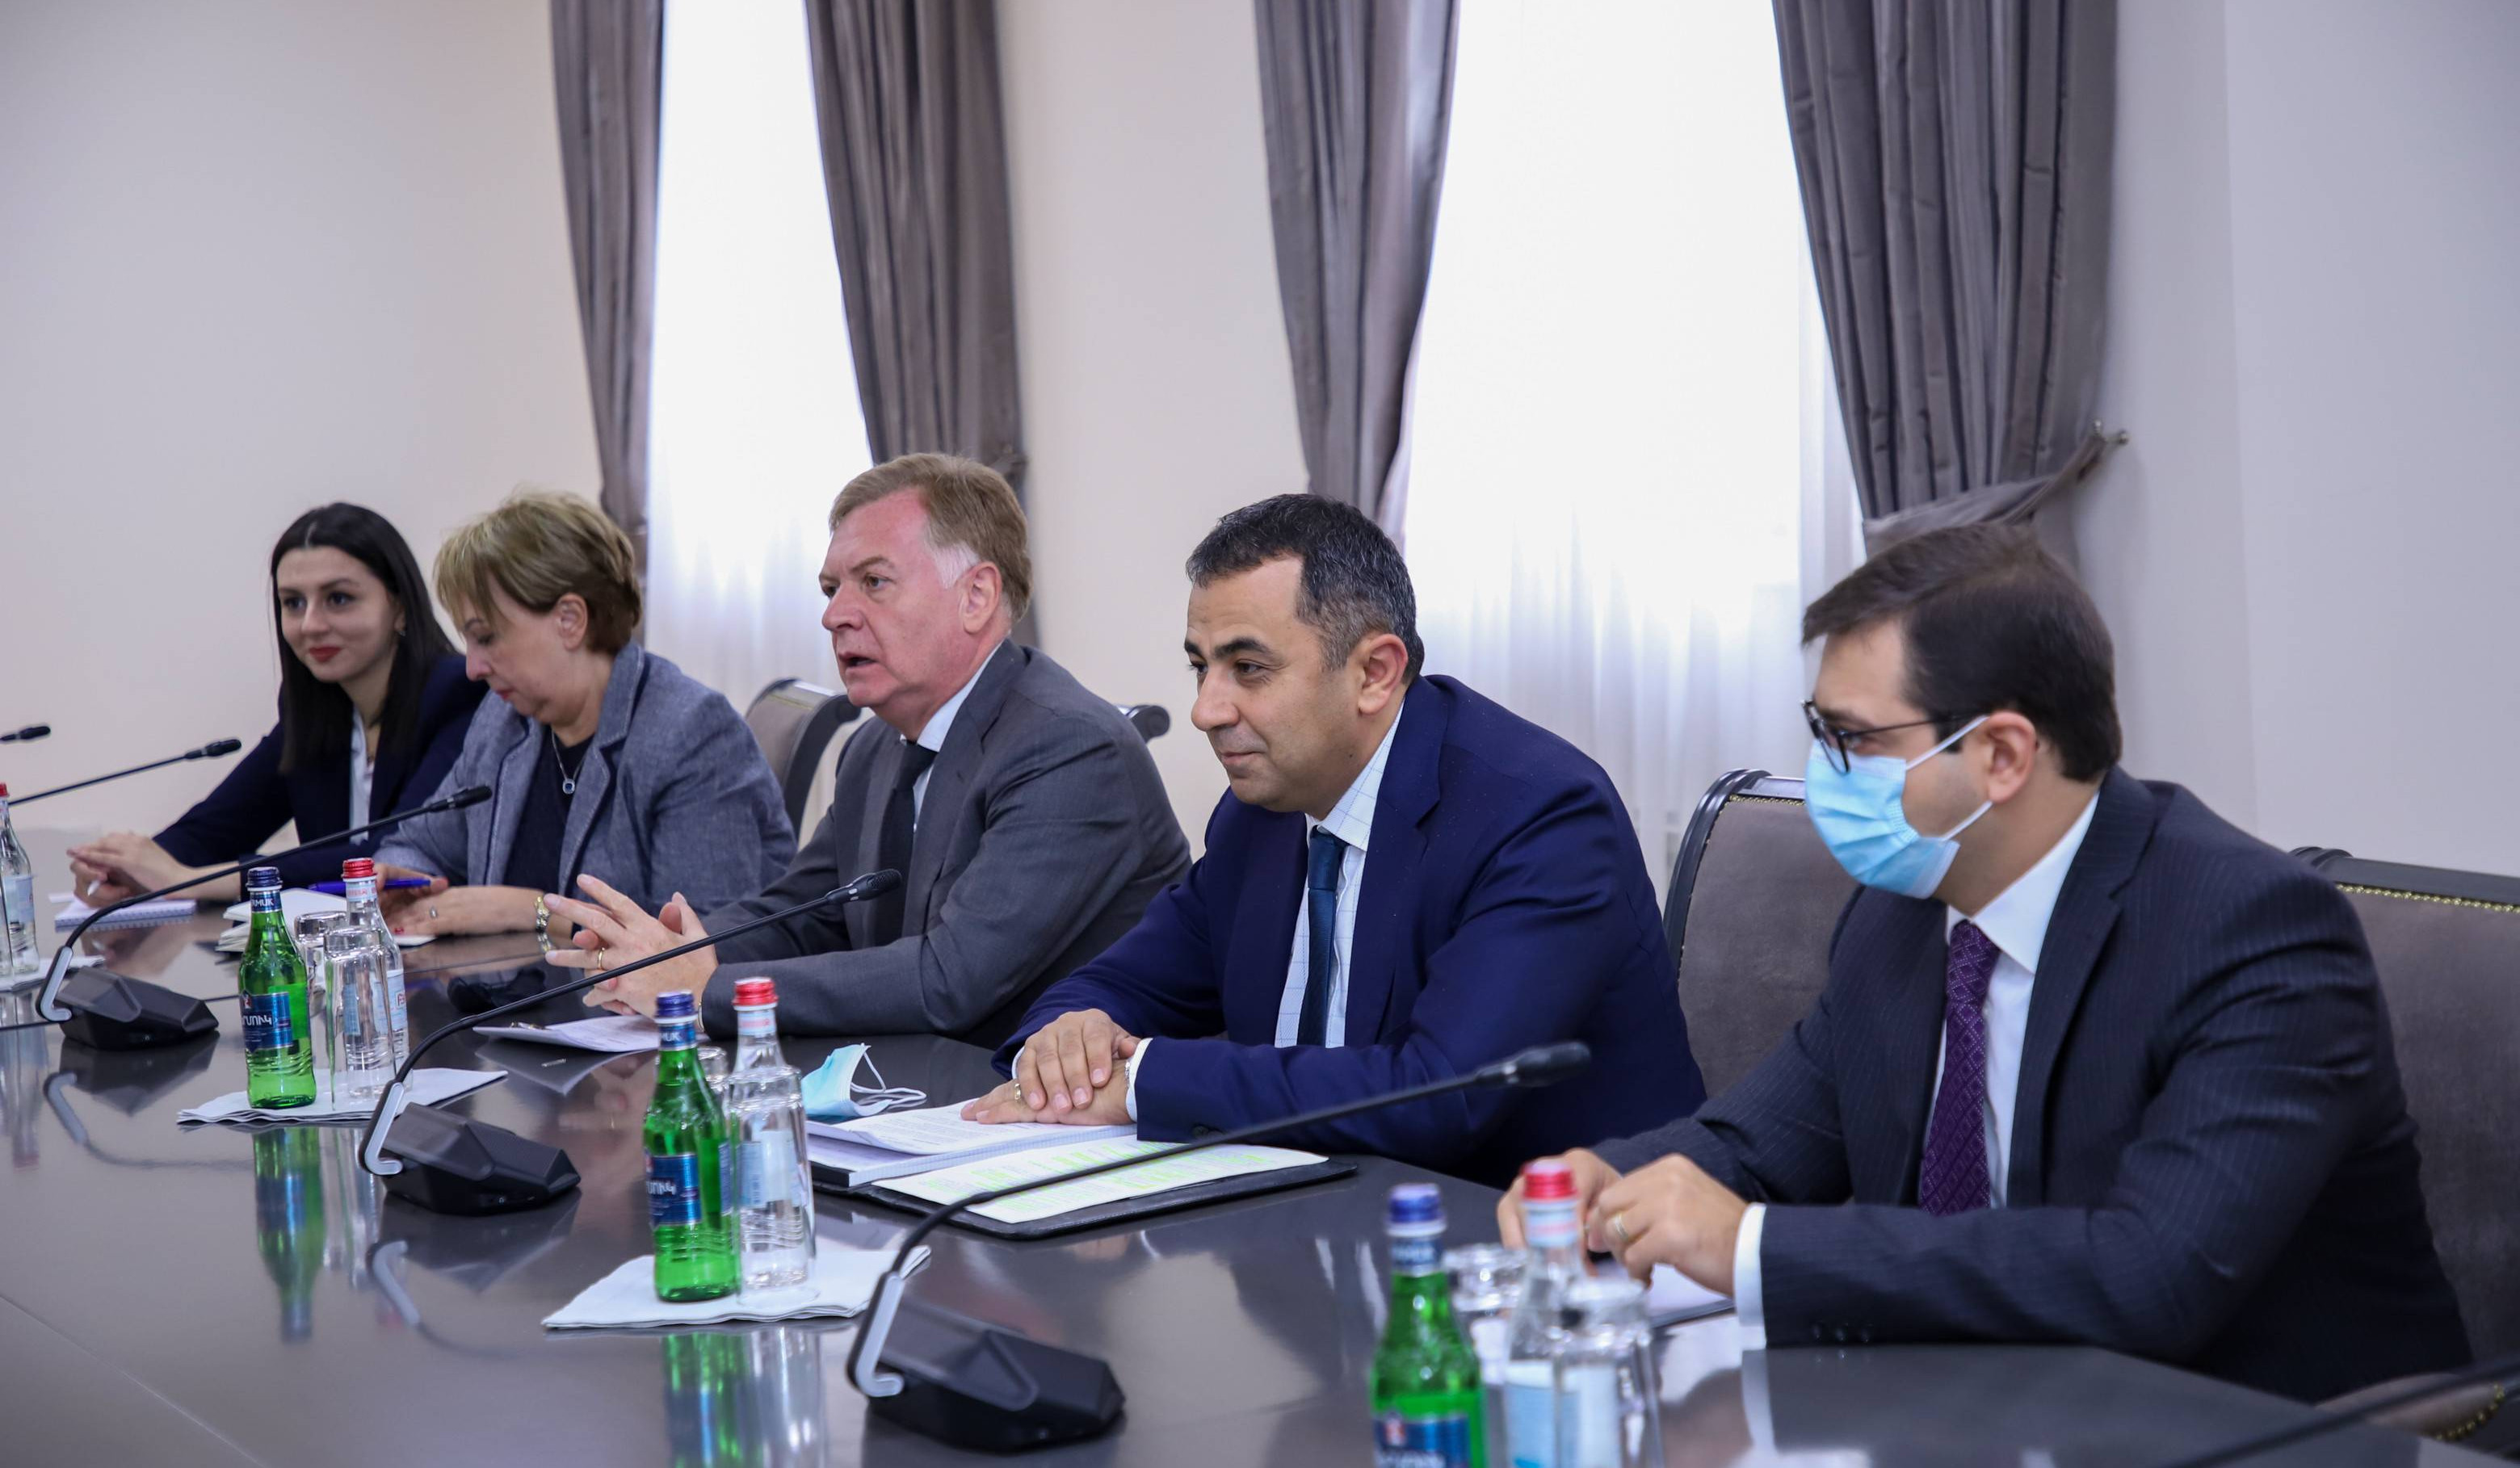 Deputy Foreign Minister of Armenia Vahe Gevorgyan met with the EU Delegation led by Lawrence Meredith